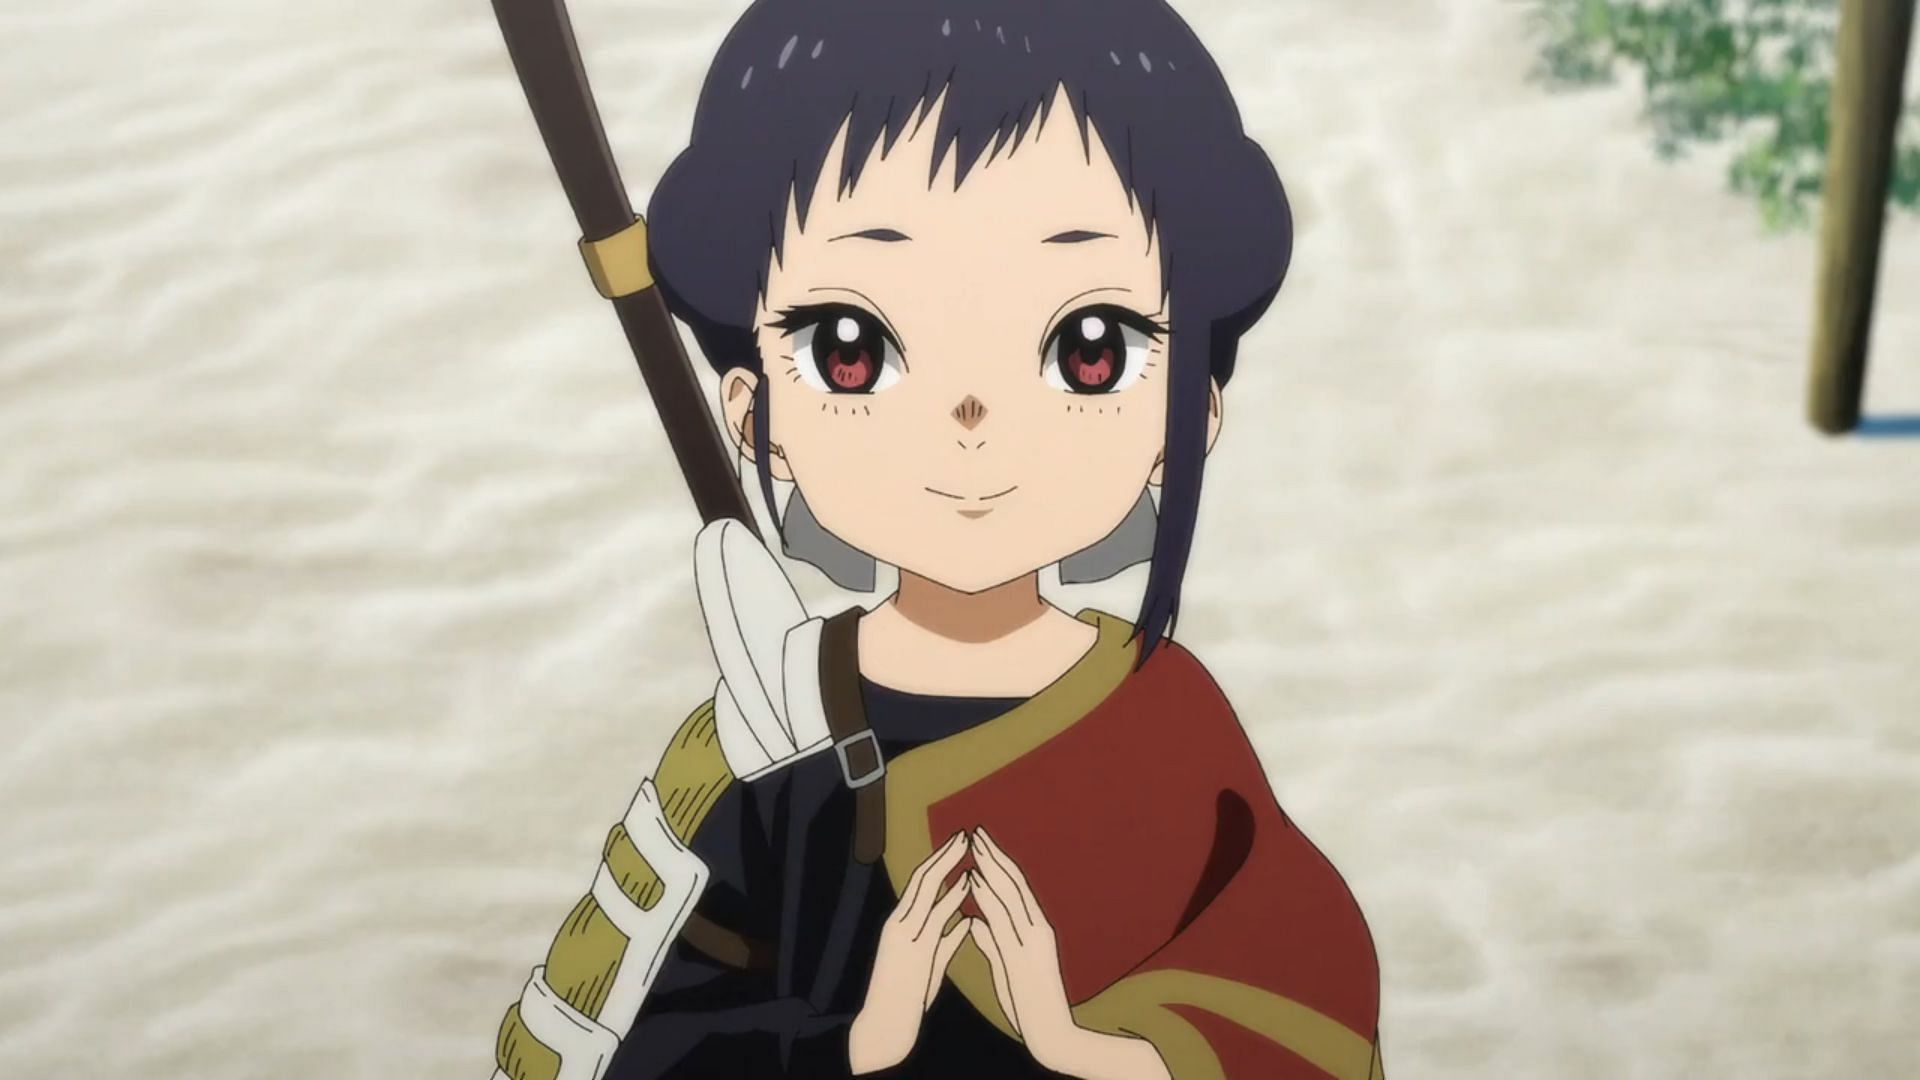 Hisame, granddaughter of Hayase, as seen in To Your Eternity season 2 premiere (Image via Studio Drive)